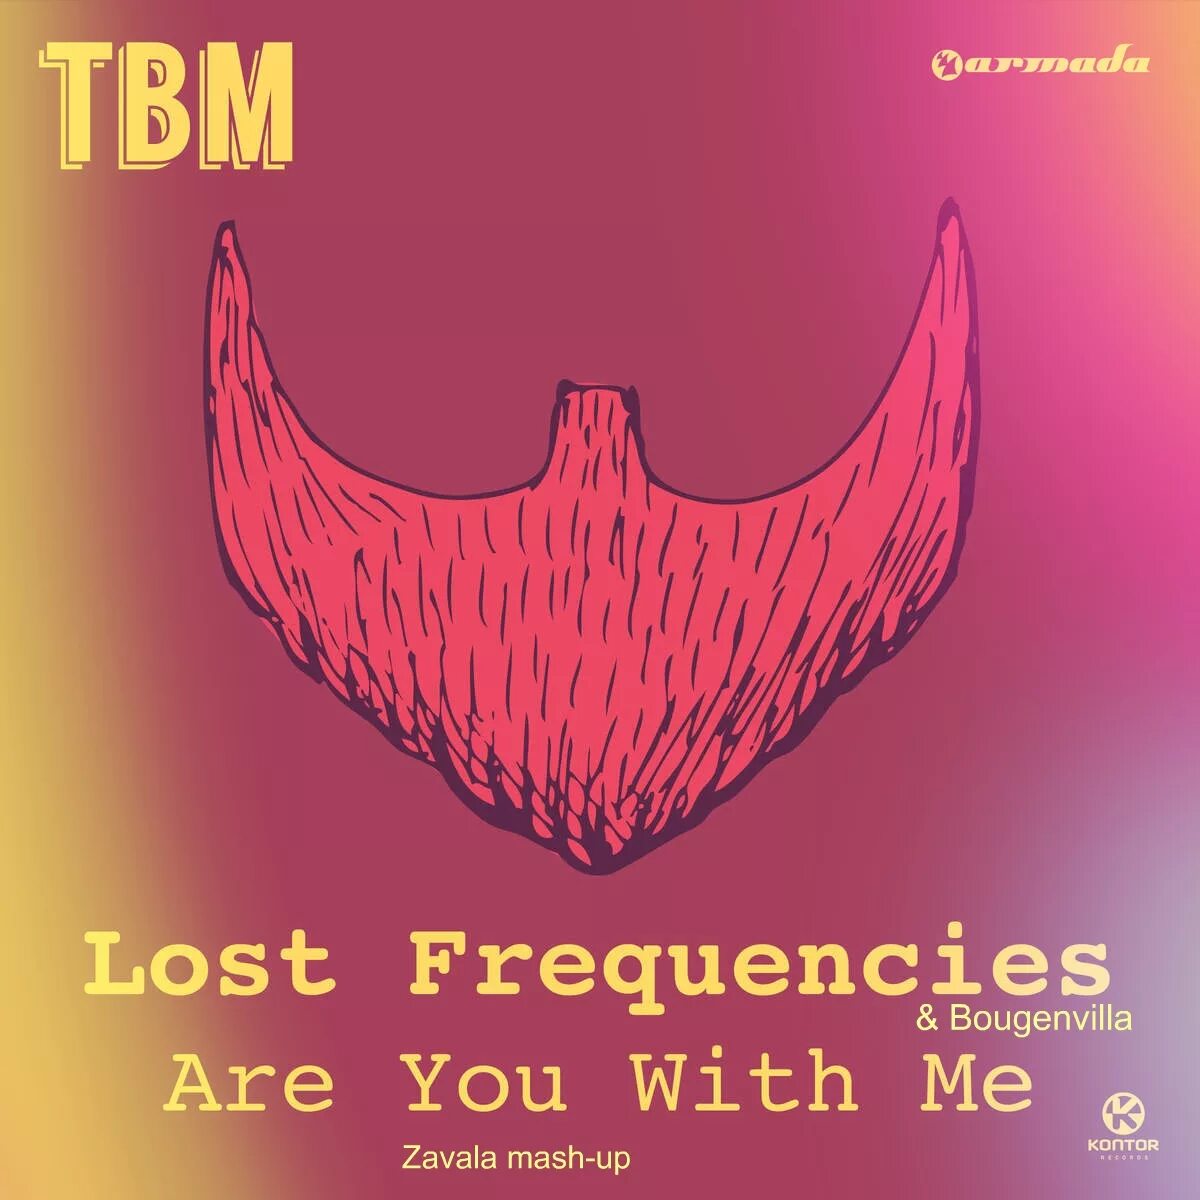 Reality Lost Frequencies ok. Lost Frequencies where are you. Lost frequencies head